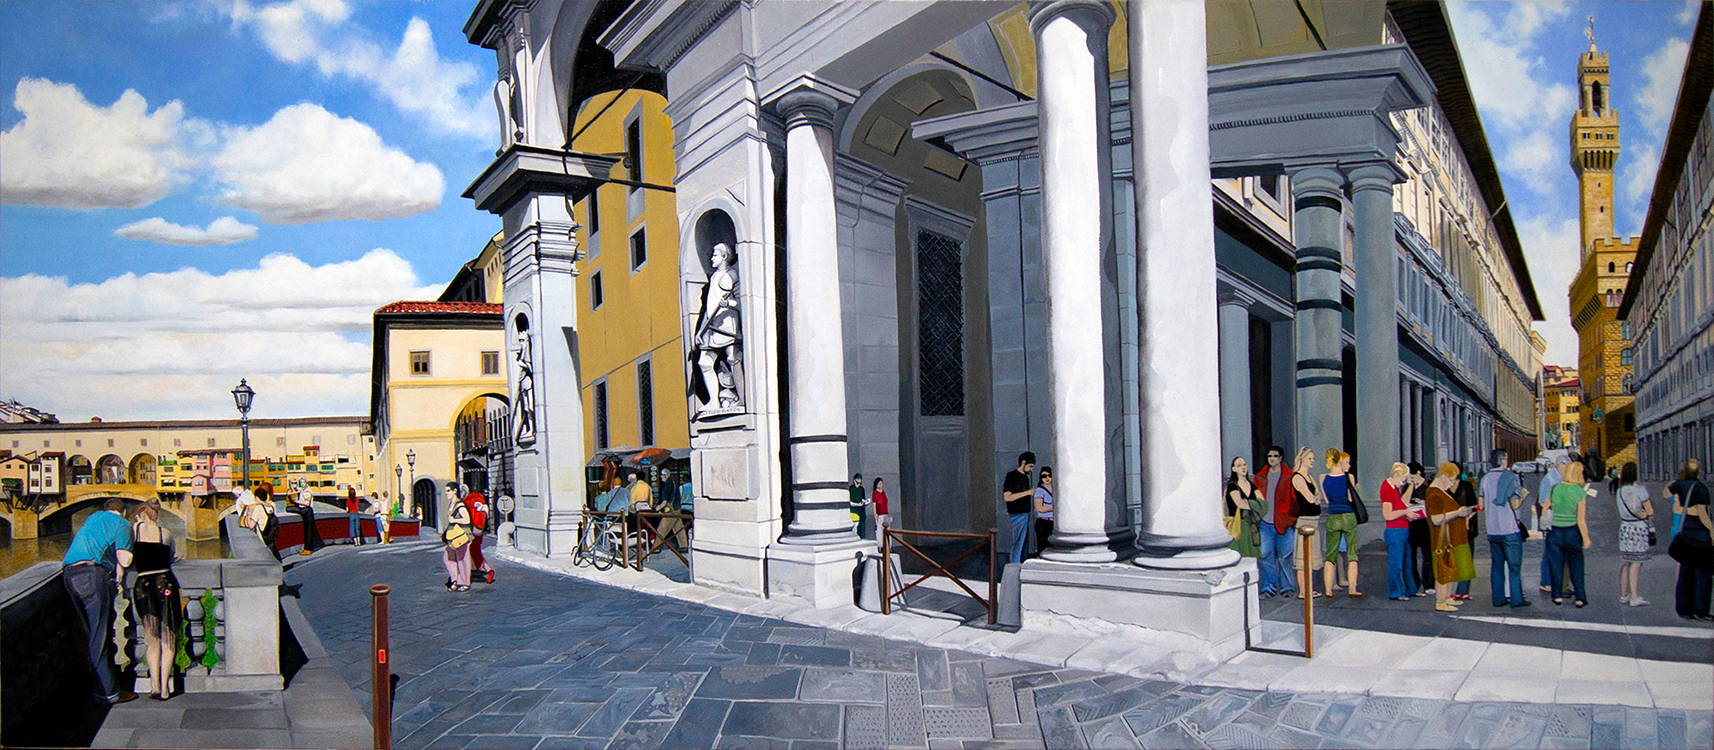 "Waiting in Line at the Uffizi" an original oil painting by Matthew Holden Bates